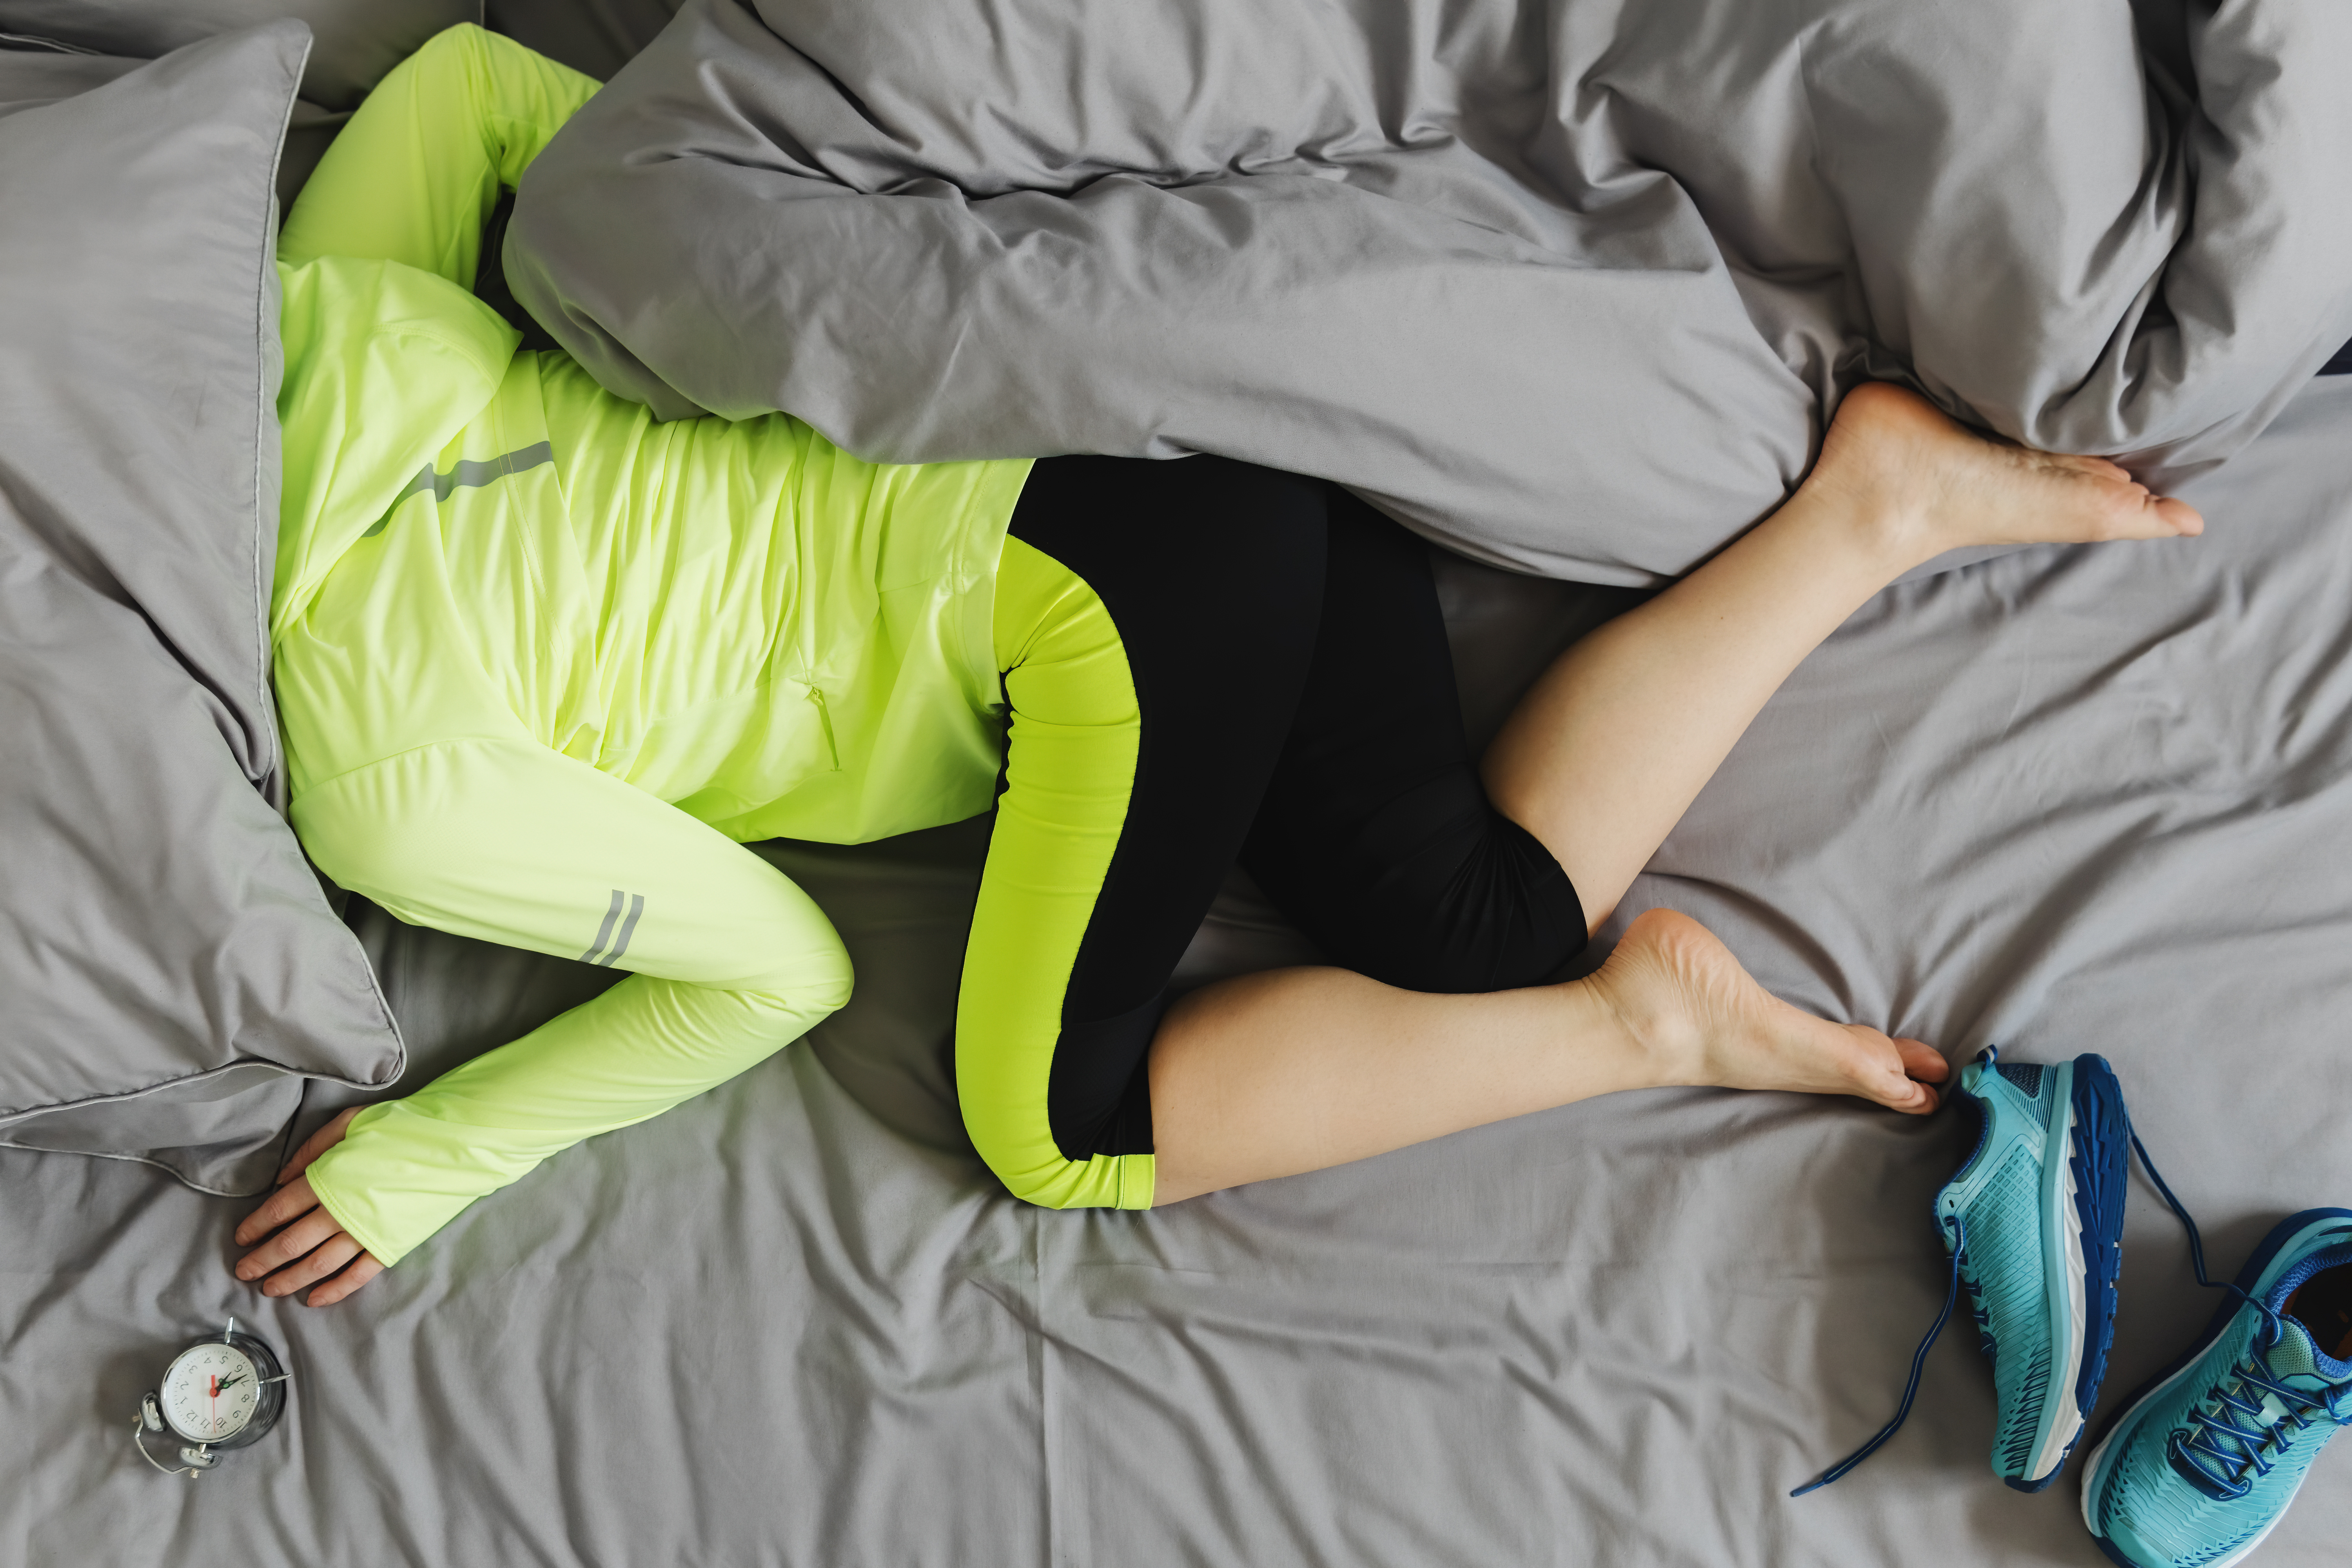 Woman in neon green hooded sweatshirt and black workout pants with matching green stripe, lying on an unmade bed with gray linens, head hidden under pillow.